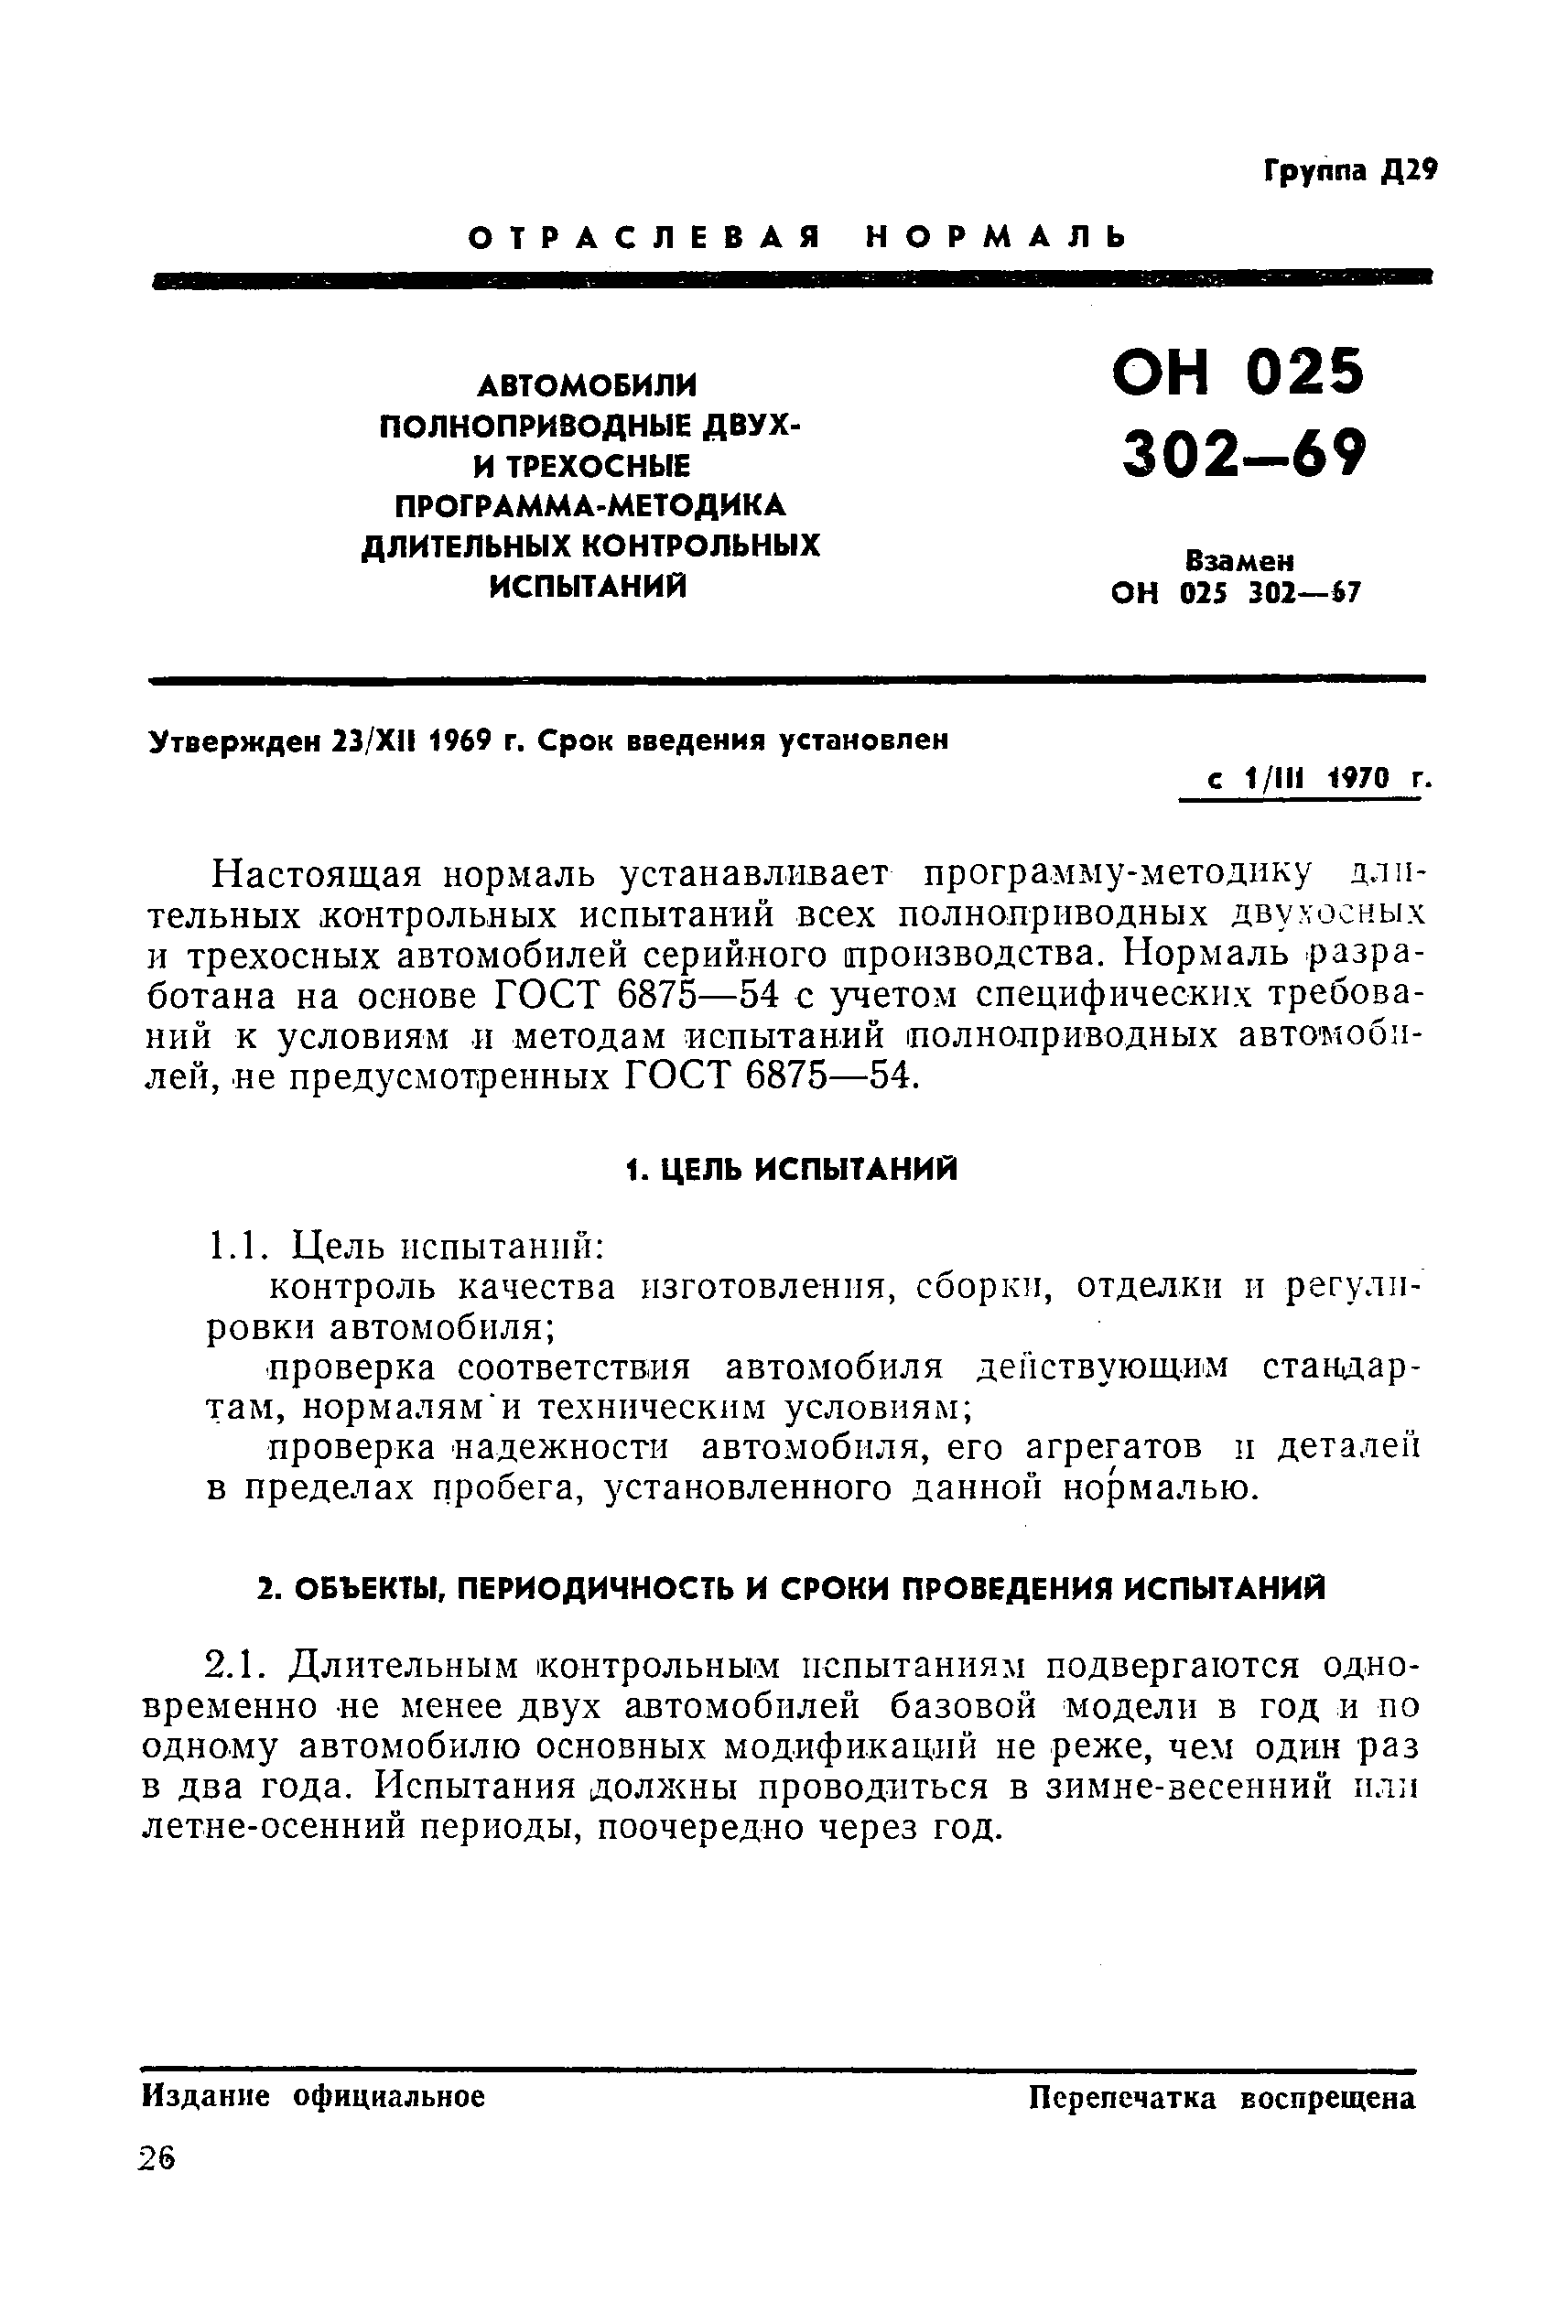 ОН 025 302-69